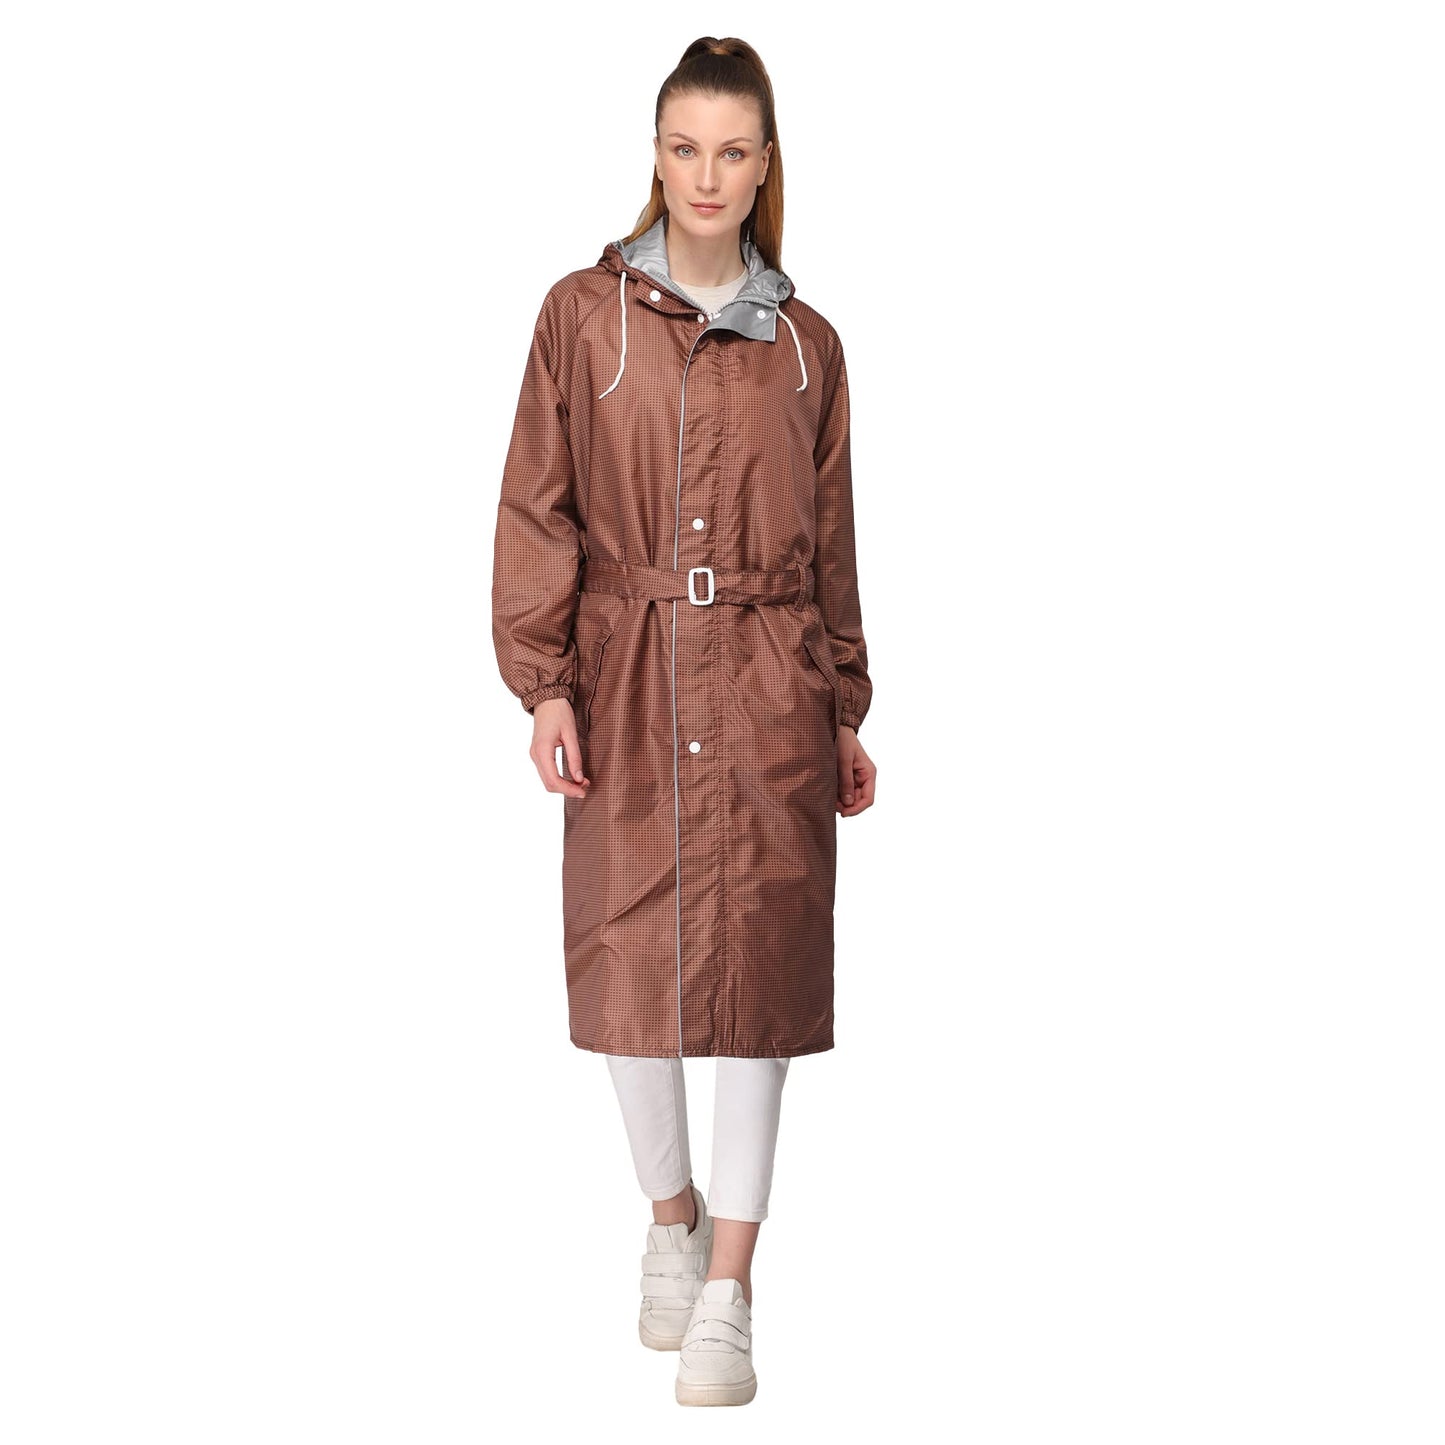 THE CLOWNFISH Raincoats for Women Waterproof Reversible Double Layer. Brilliant Pro Series (Brown, X-Large)